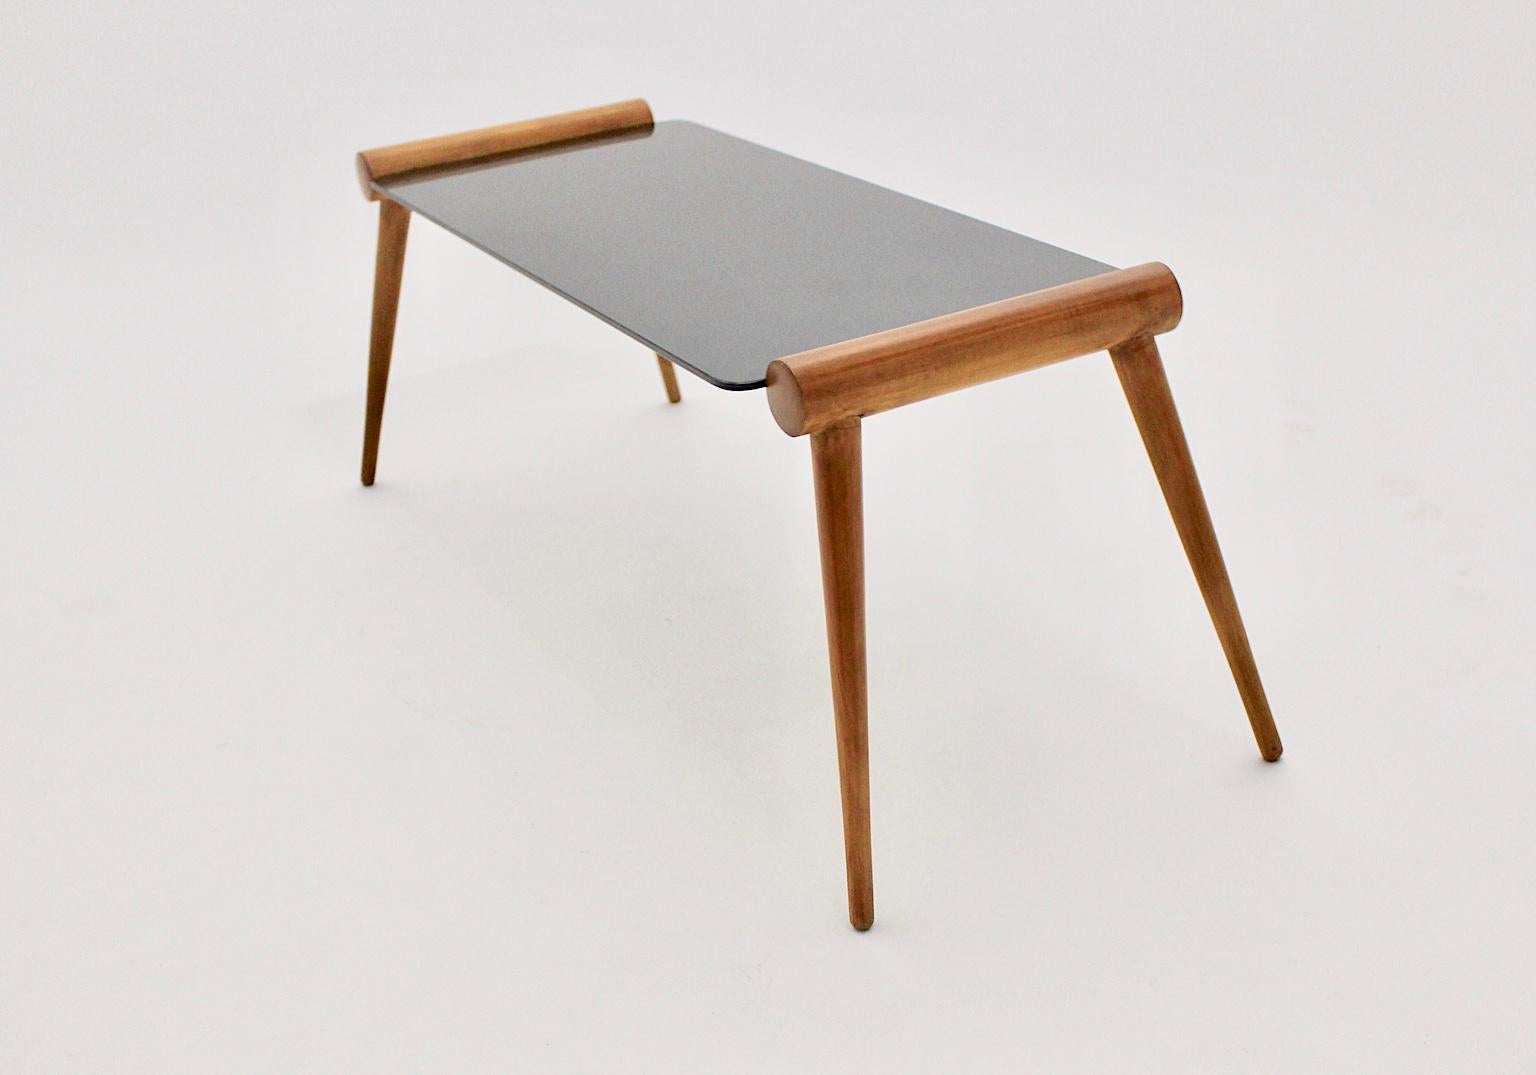 20th Century Mid-Century Modern Vintage Maple Tree Coffee Table by Max Kment, Vienna, 1950s For Sale